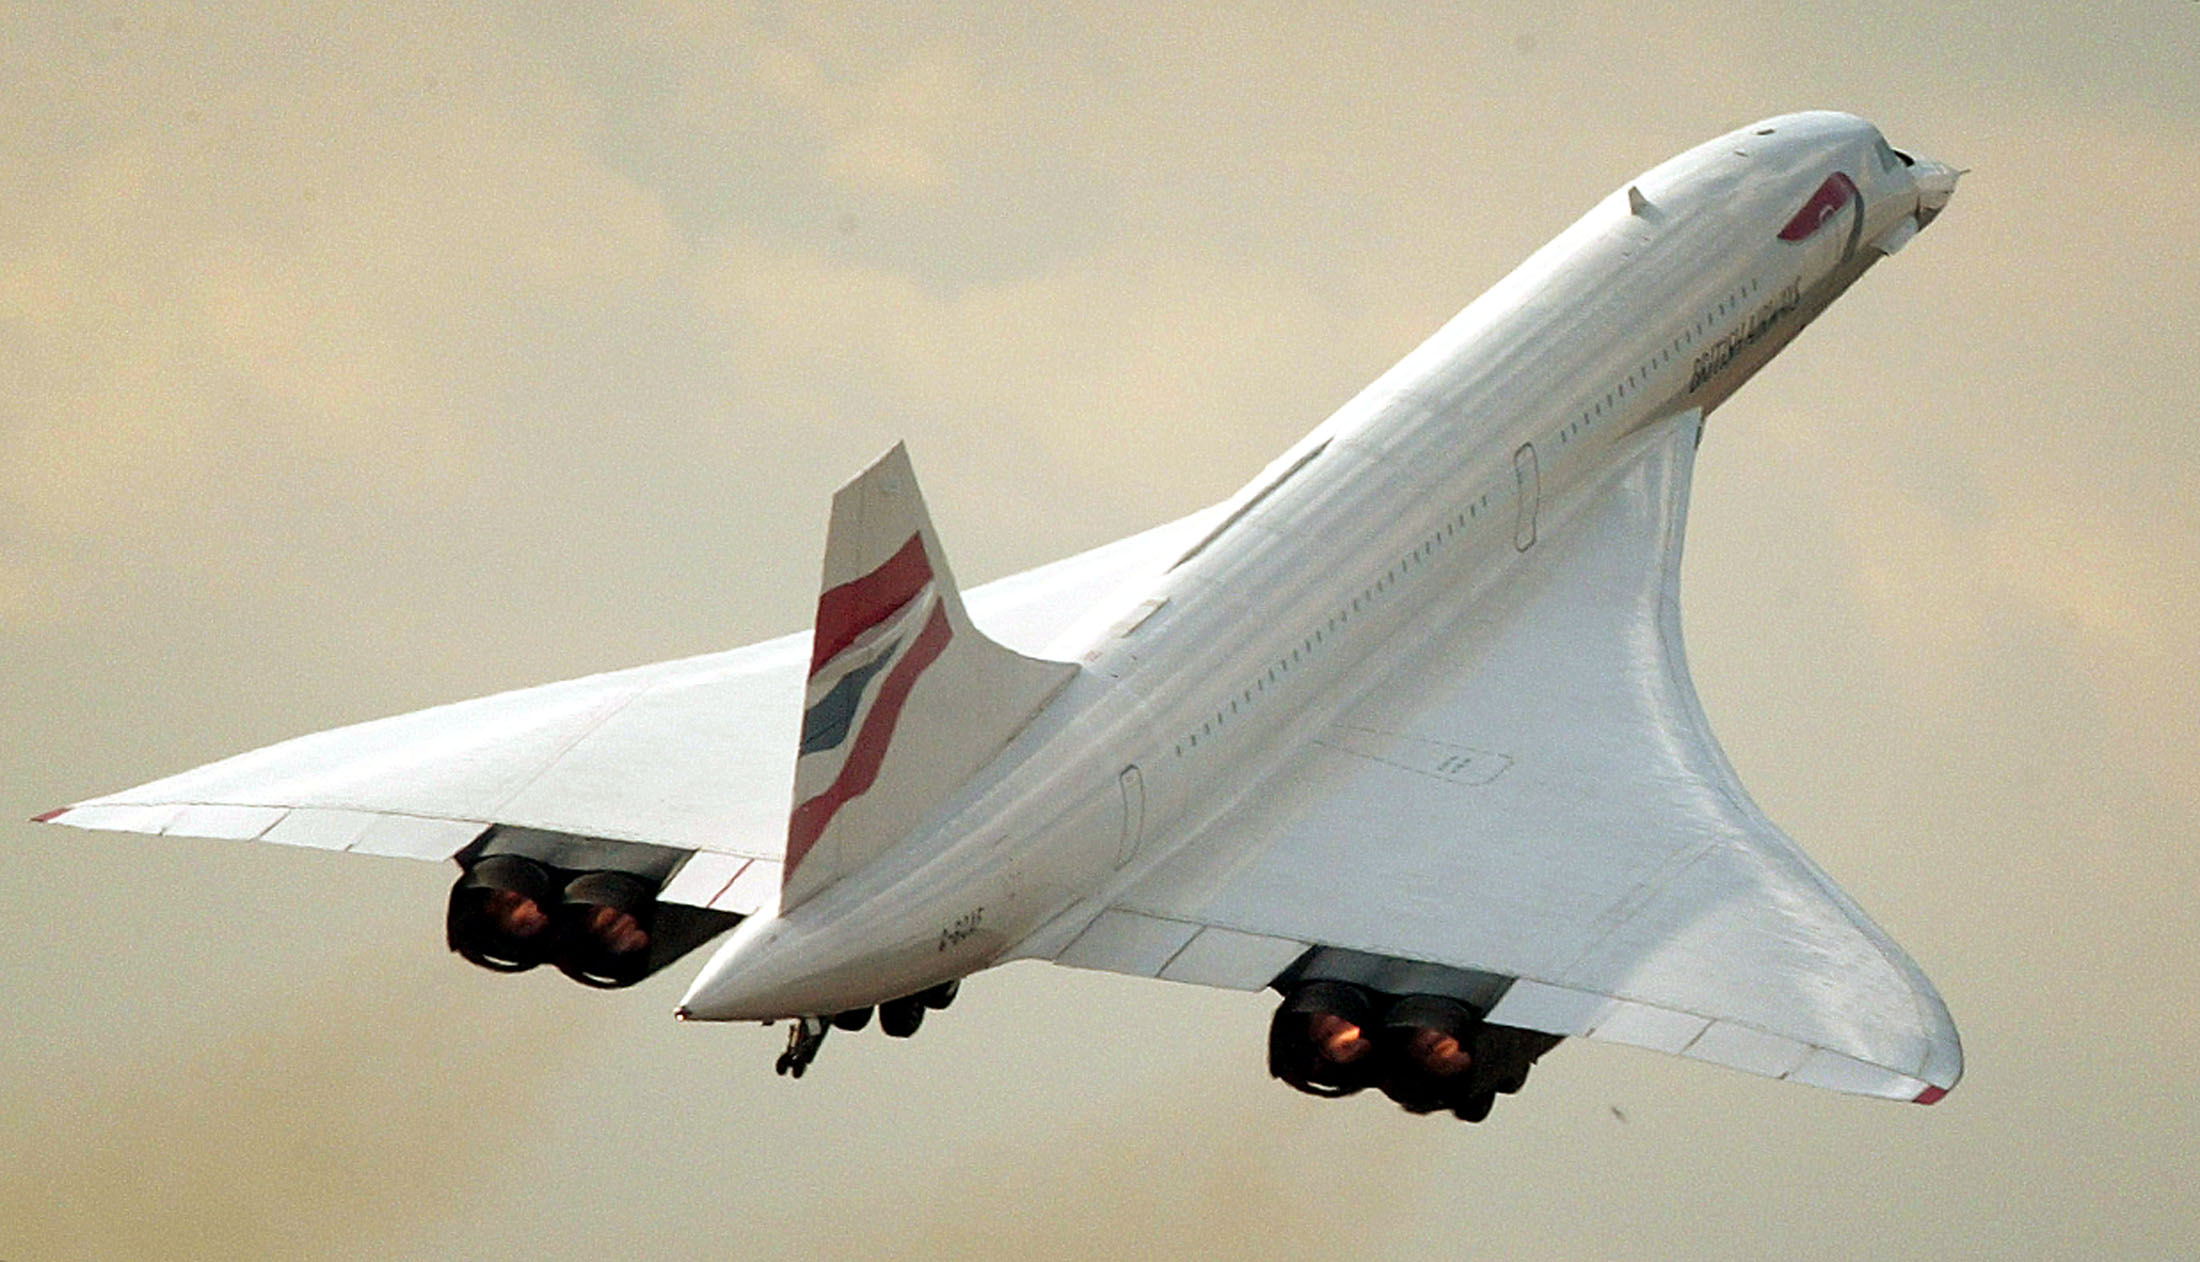 Amazing Concorde Pictures & Backgrounds